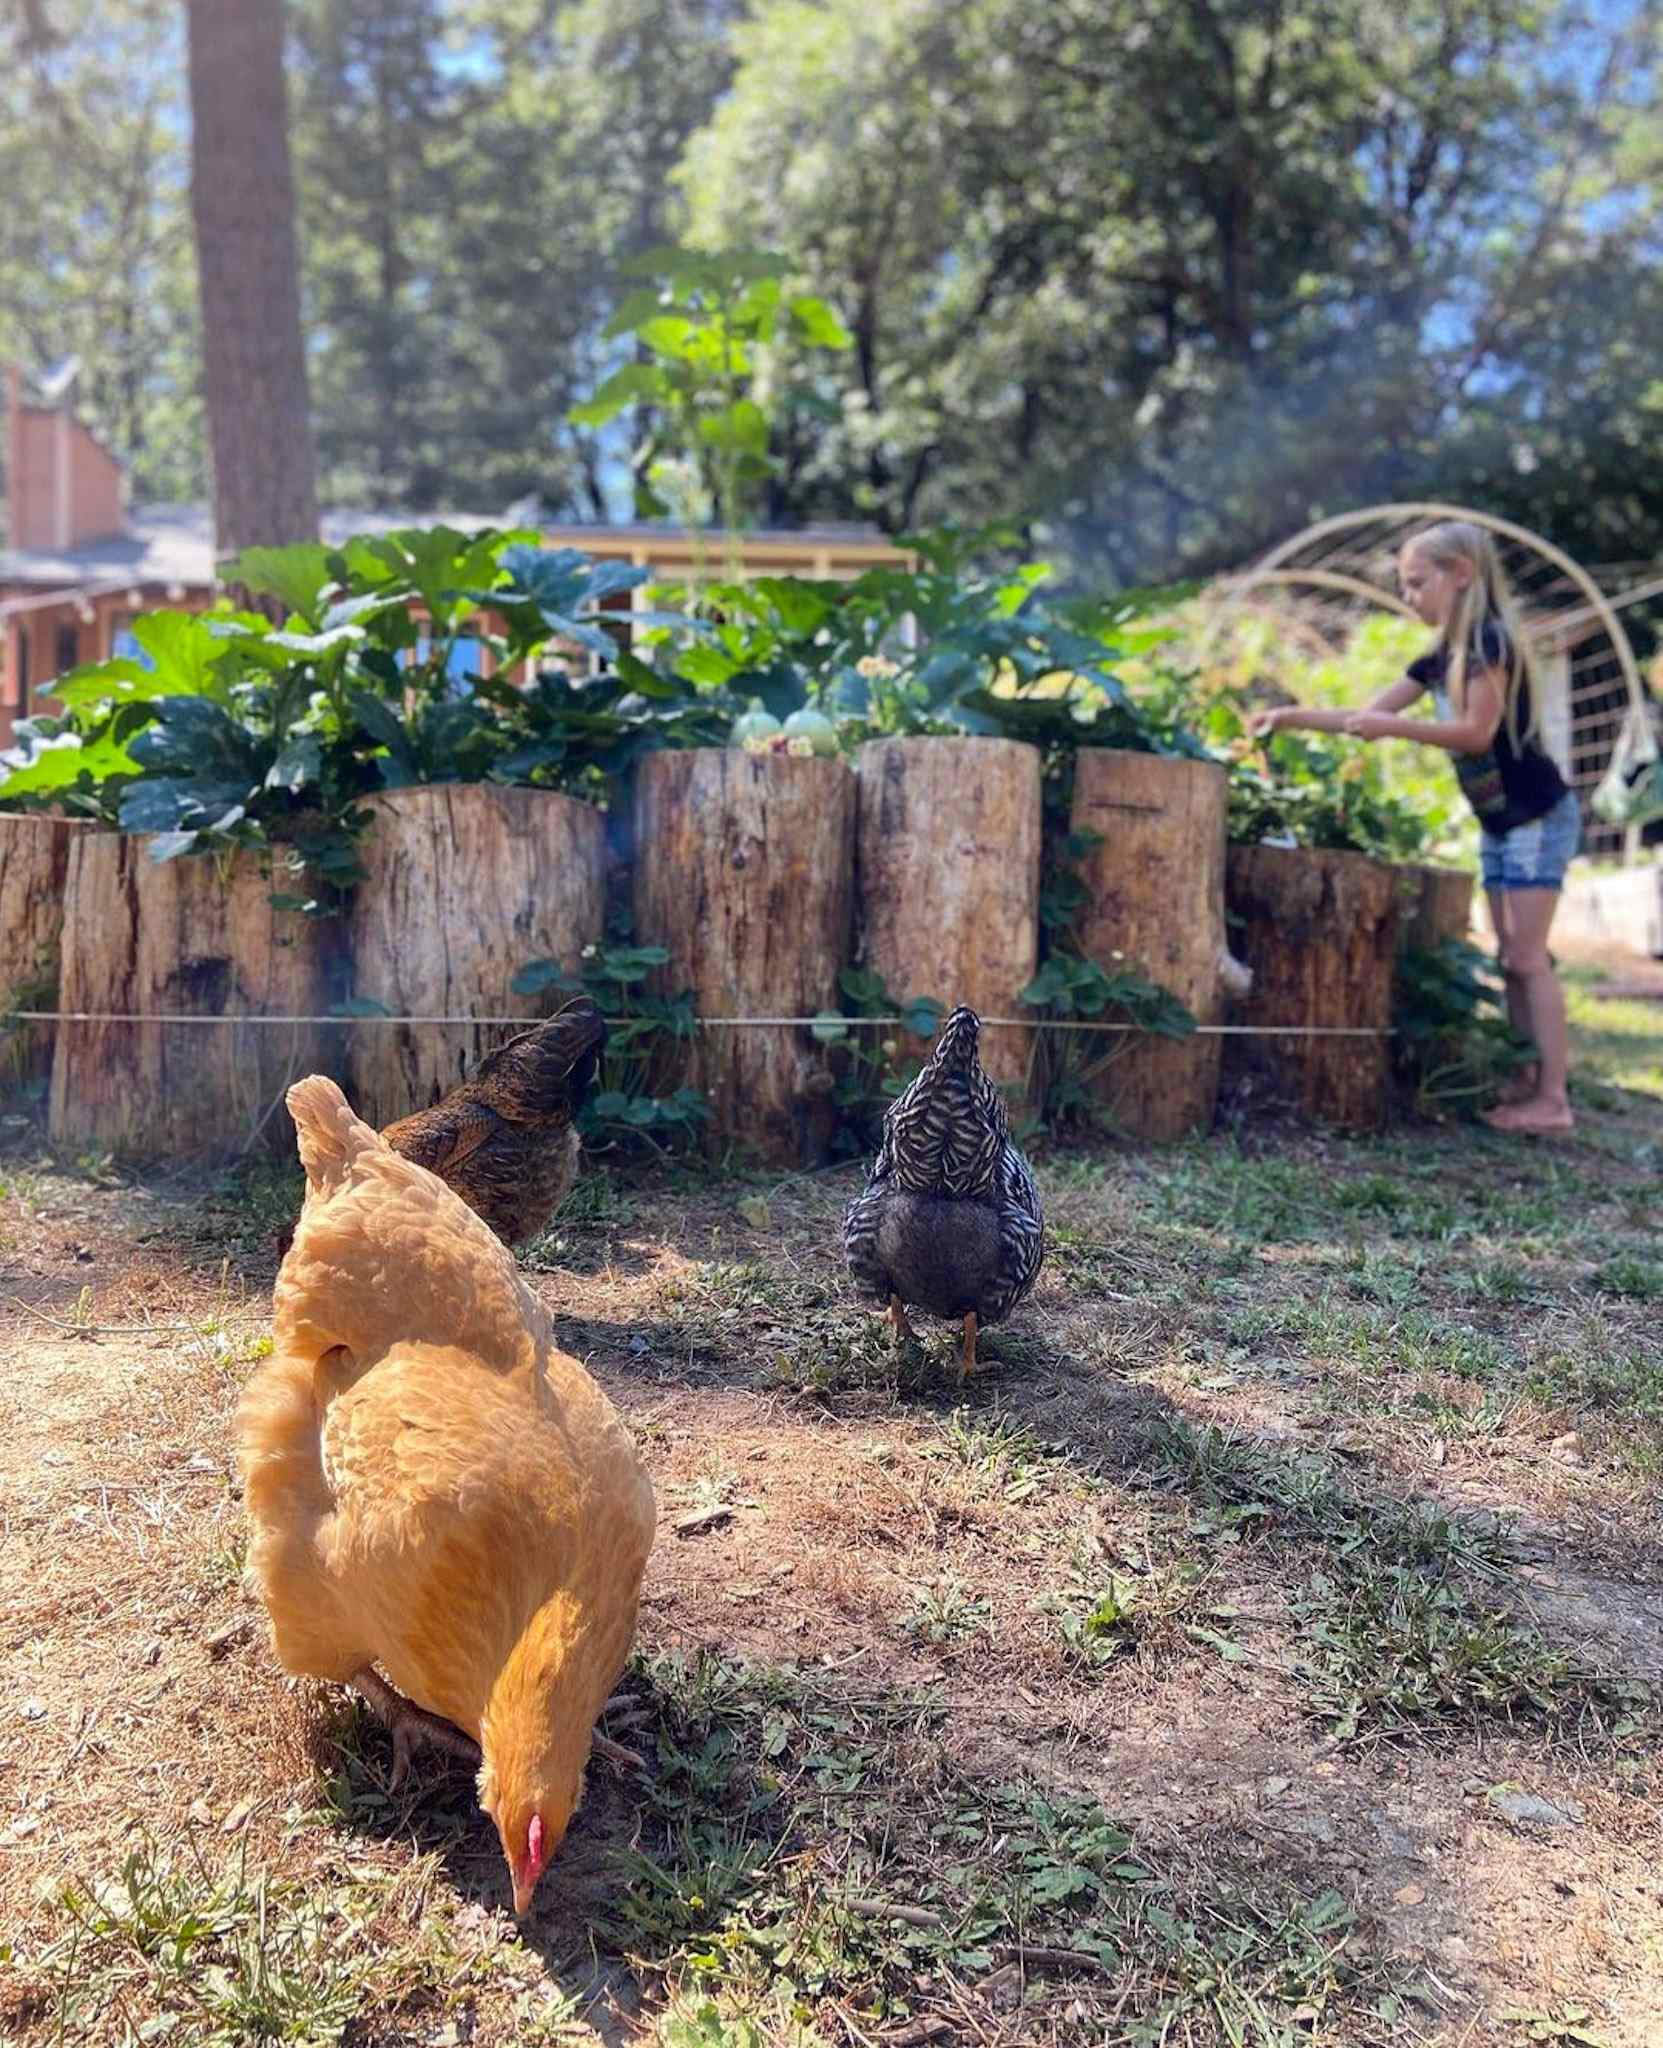 Three chickens are in the foreground with a raised garden constructed with taller rounds of logs. Tall squash plants are poking up out of the top of the raised bed.  